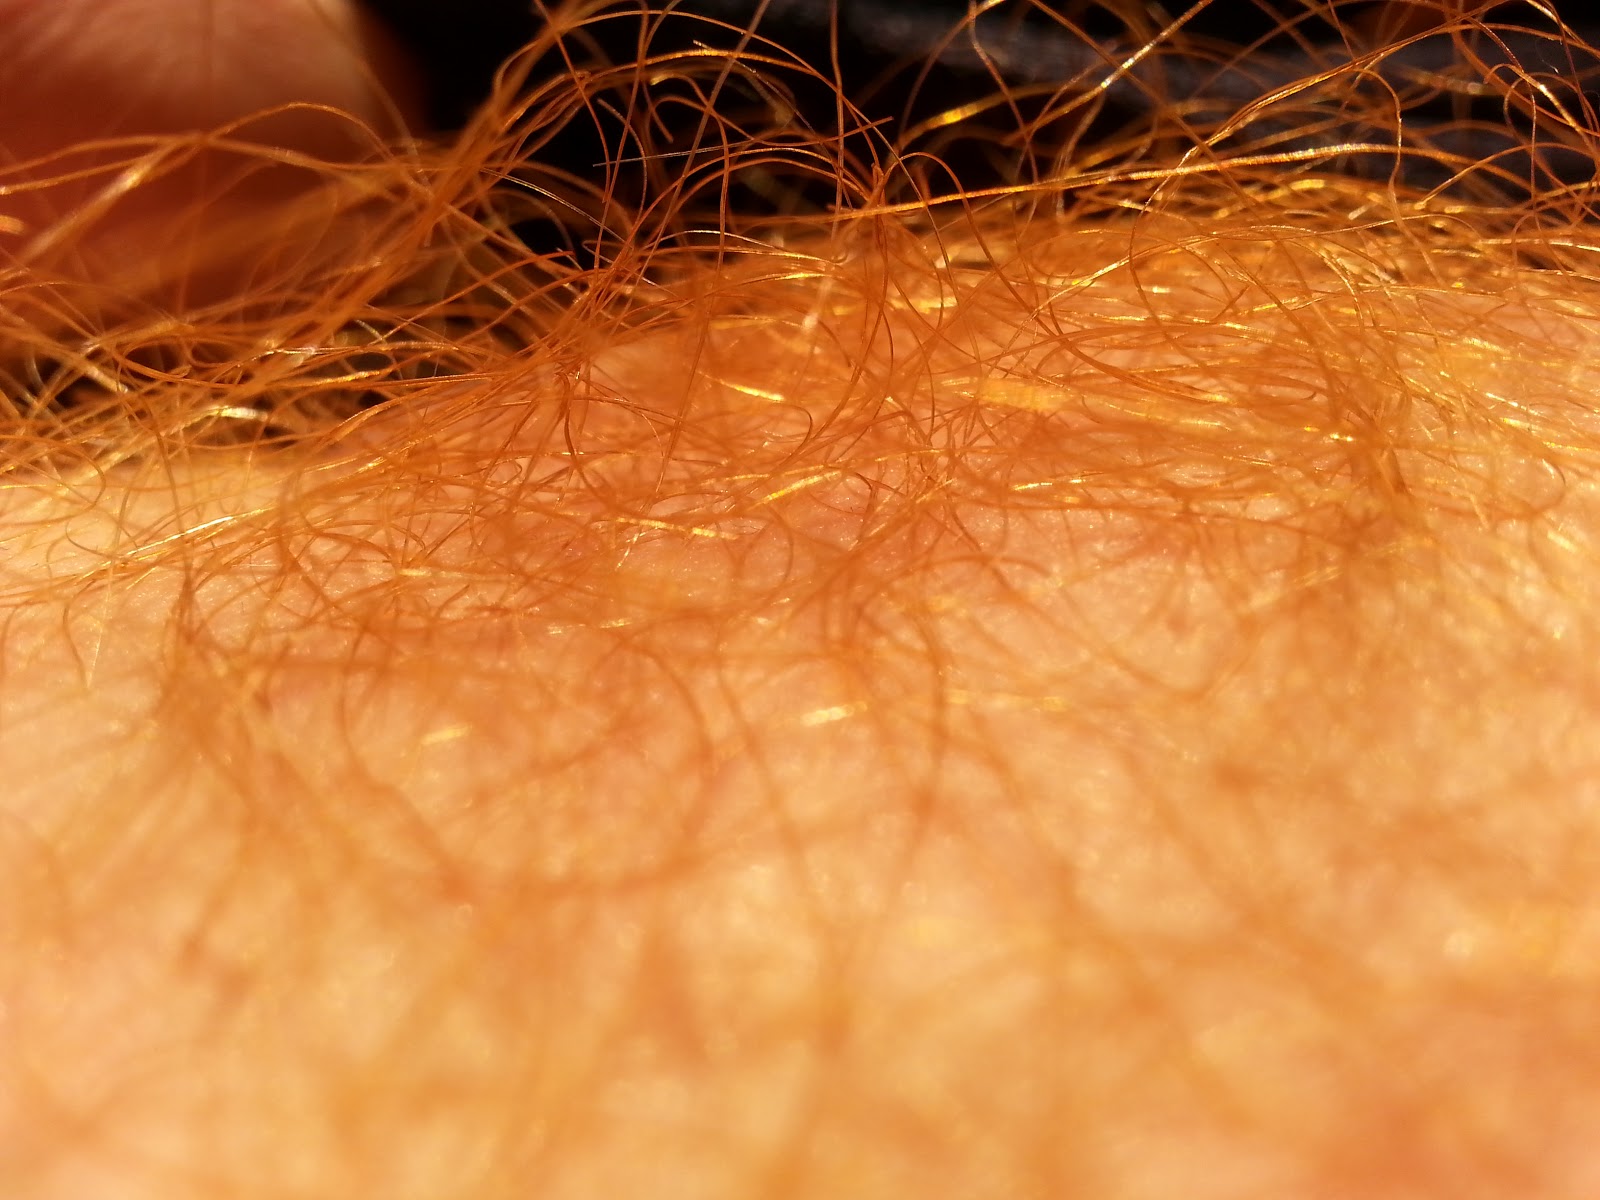 dirk richard recommends ginger pubic hair pic